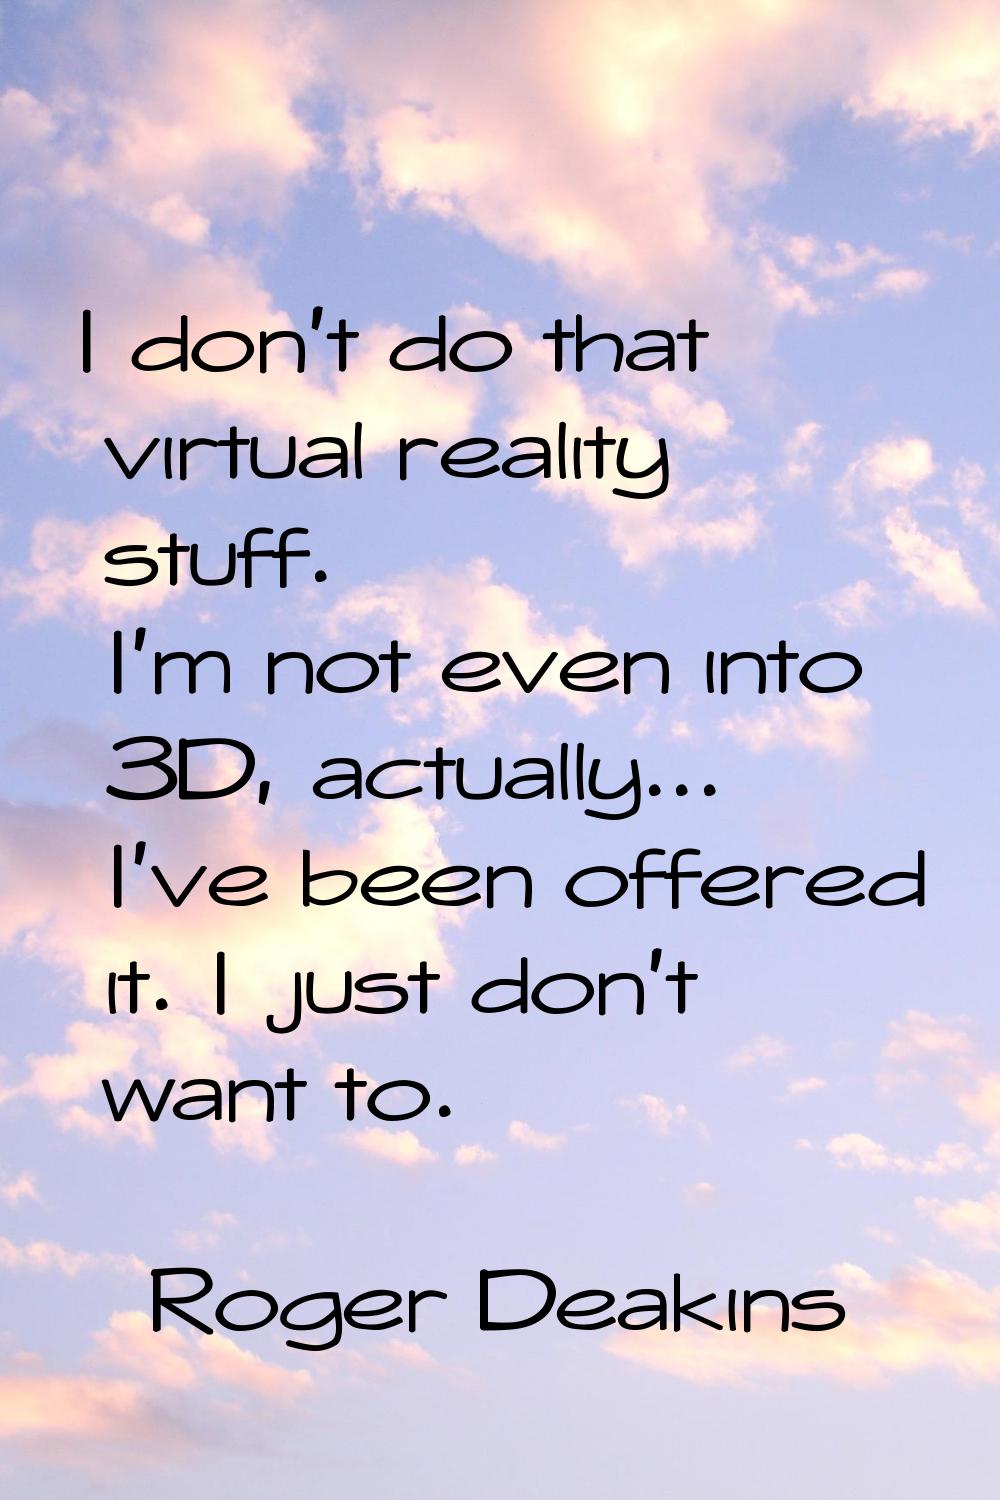 I don't do that virtual reality stuff. I'm not even into 3D, actually... I've been offered it. I ju